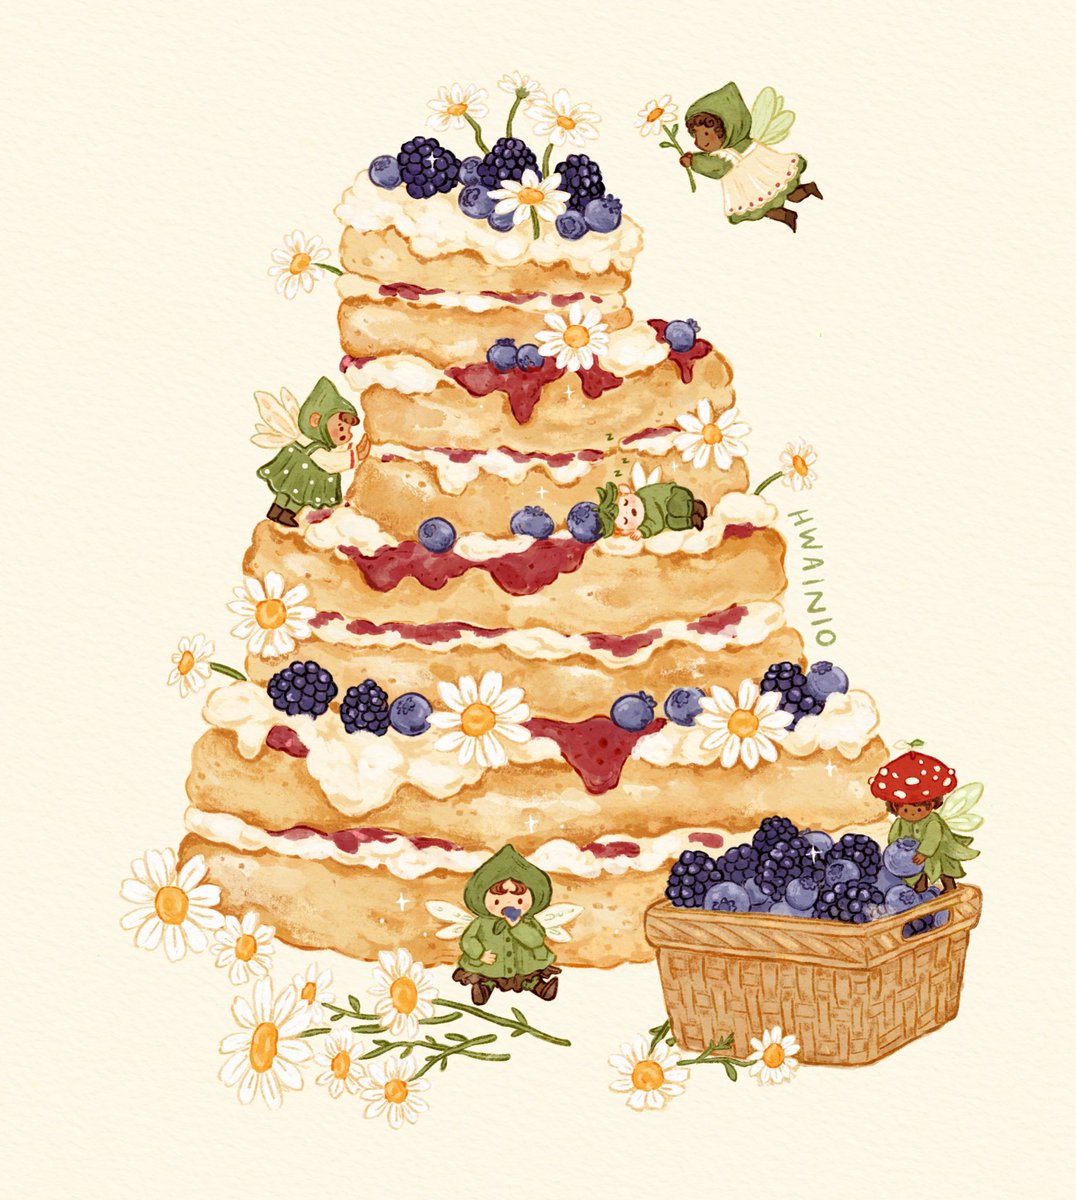 「Let's decorate a cake together ~ 」|🌿🍄 Hanna 🍄🌿 in Japan!のイラスト